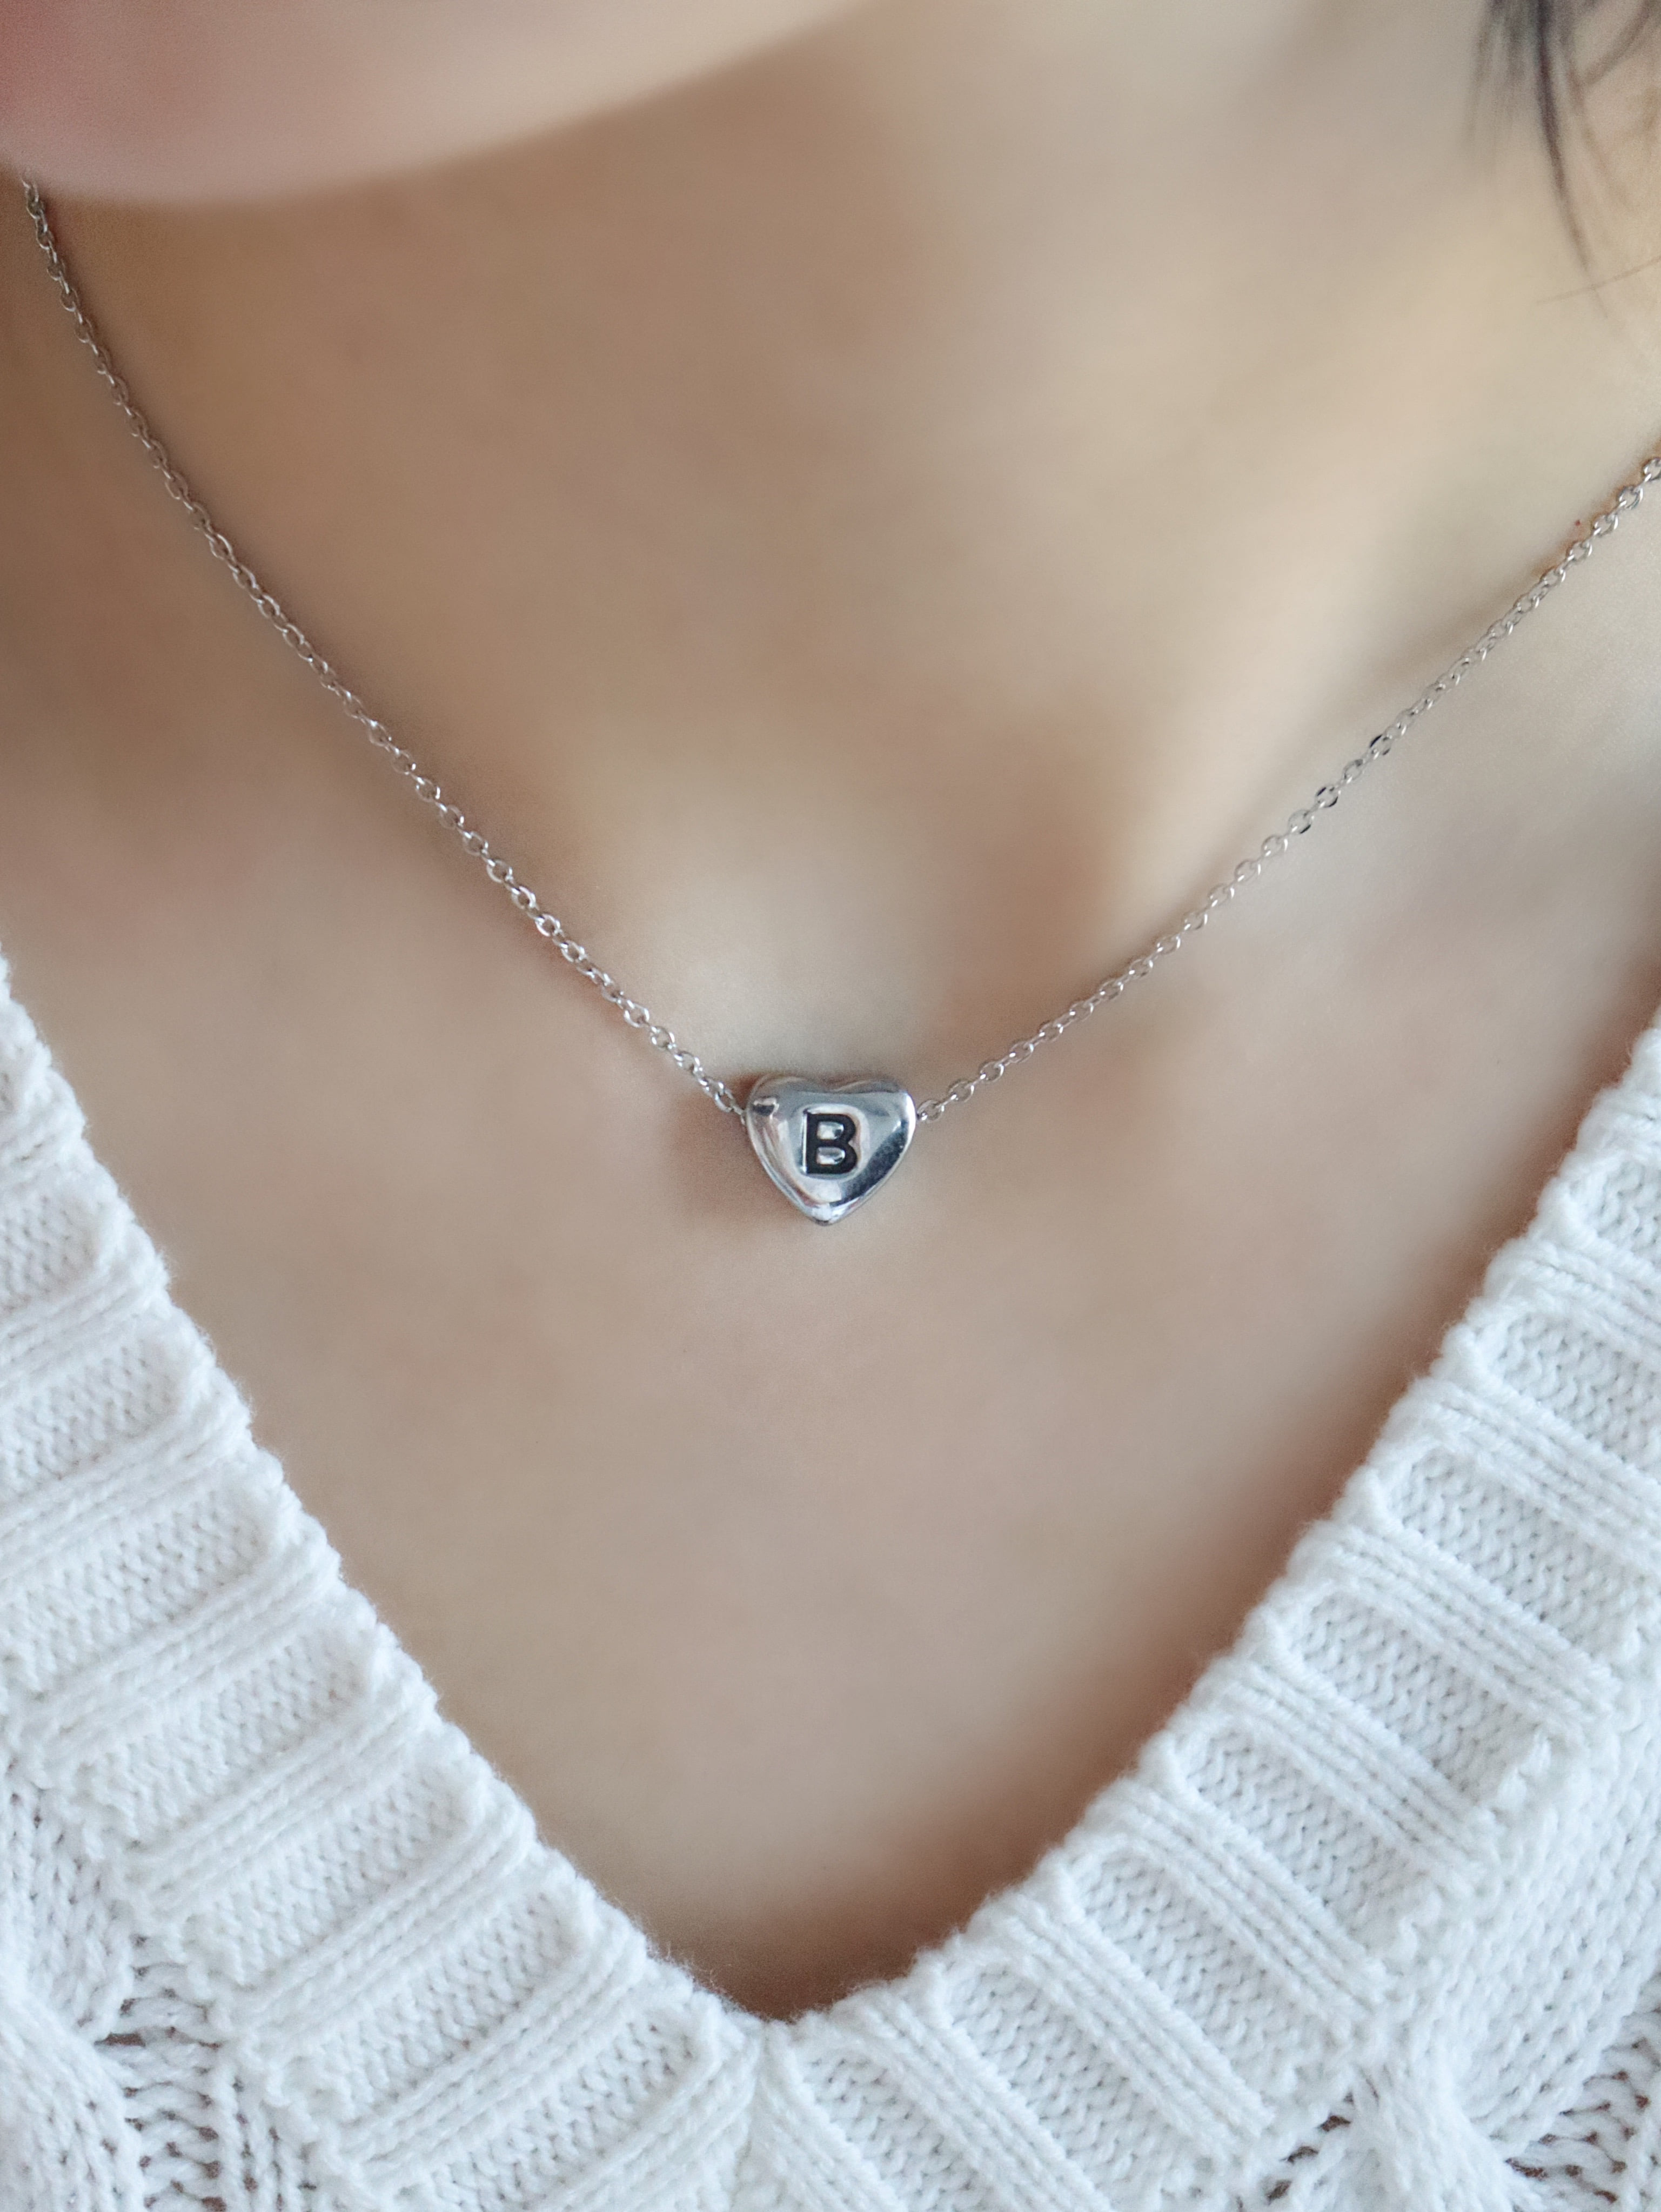 heart initial necklace